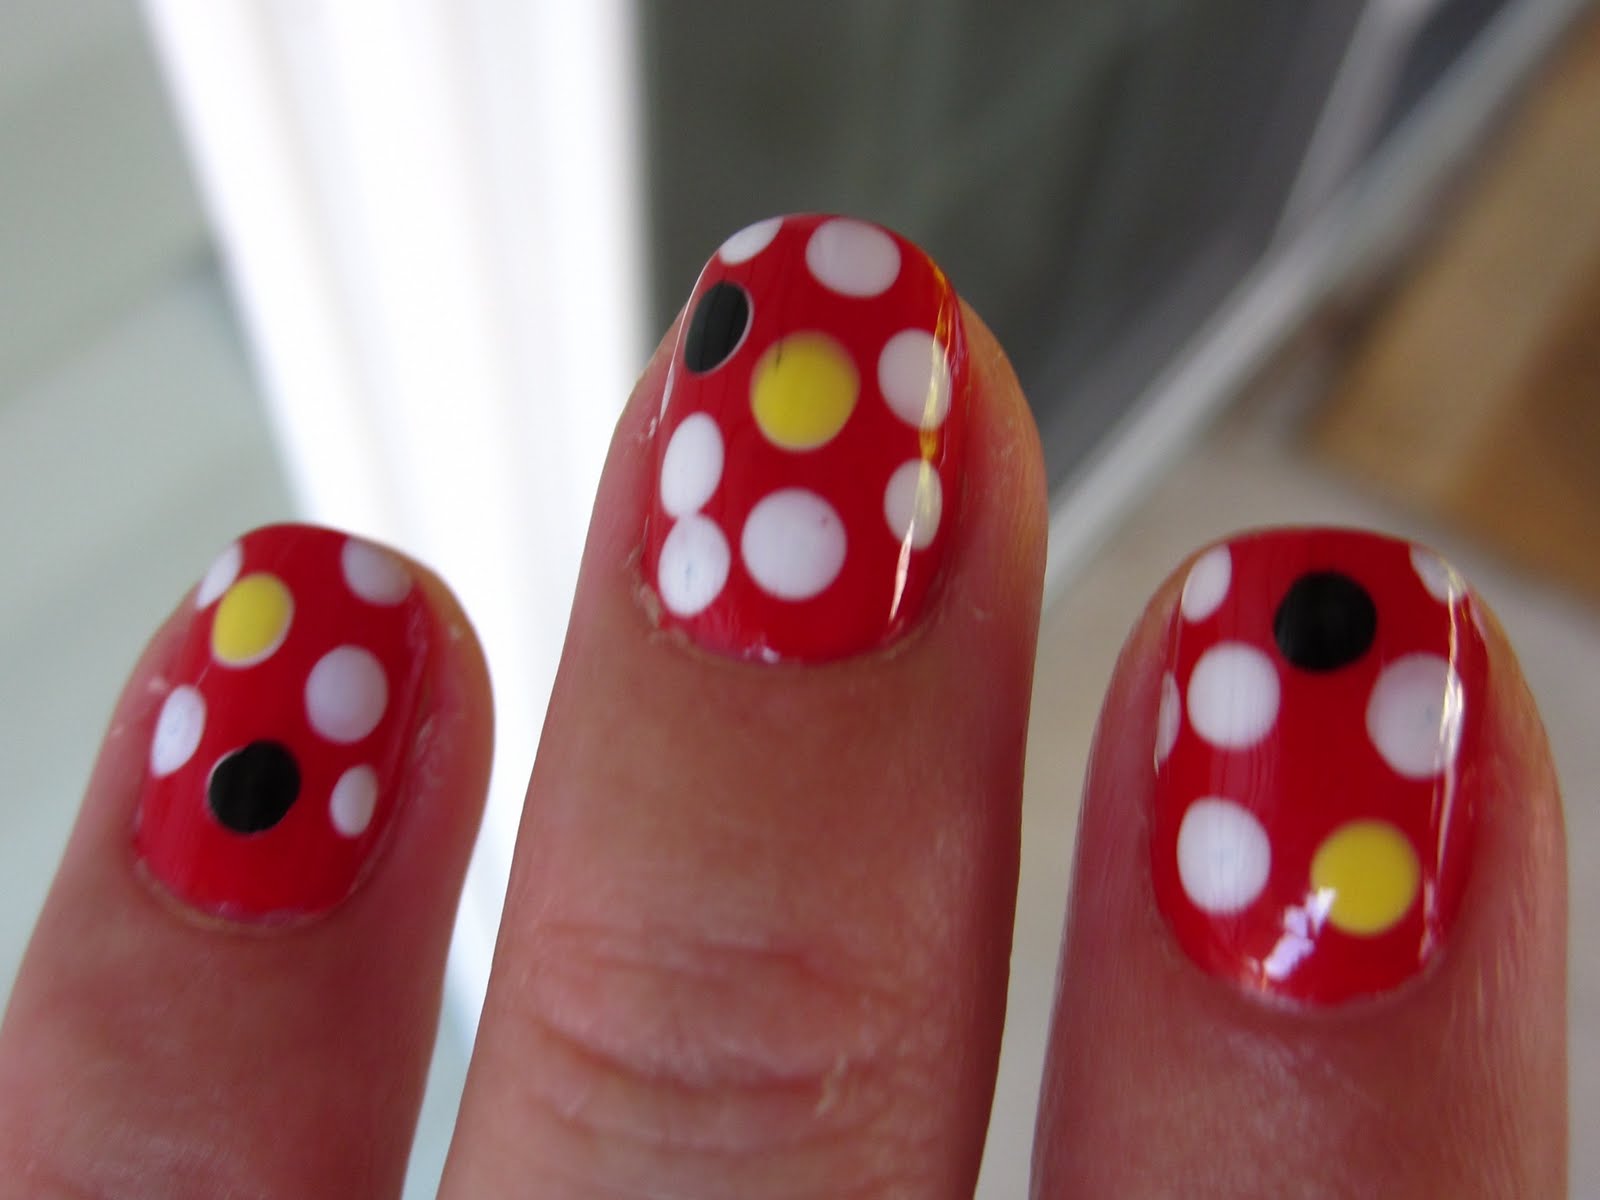 2. Minnie Mouse Nail Design - wide 1